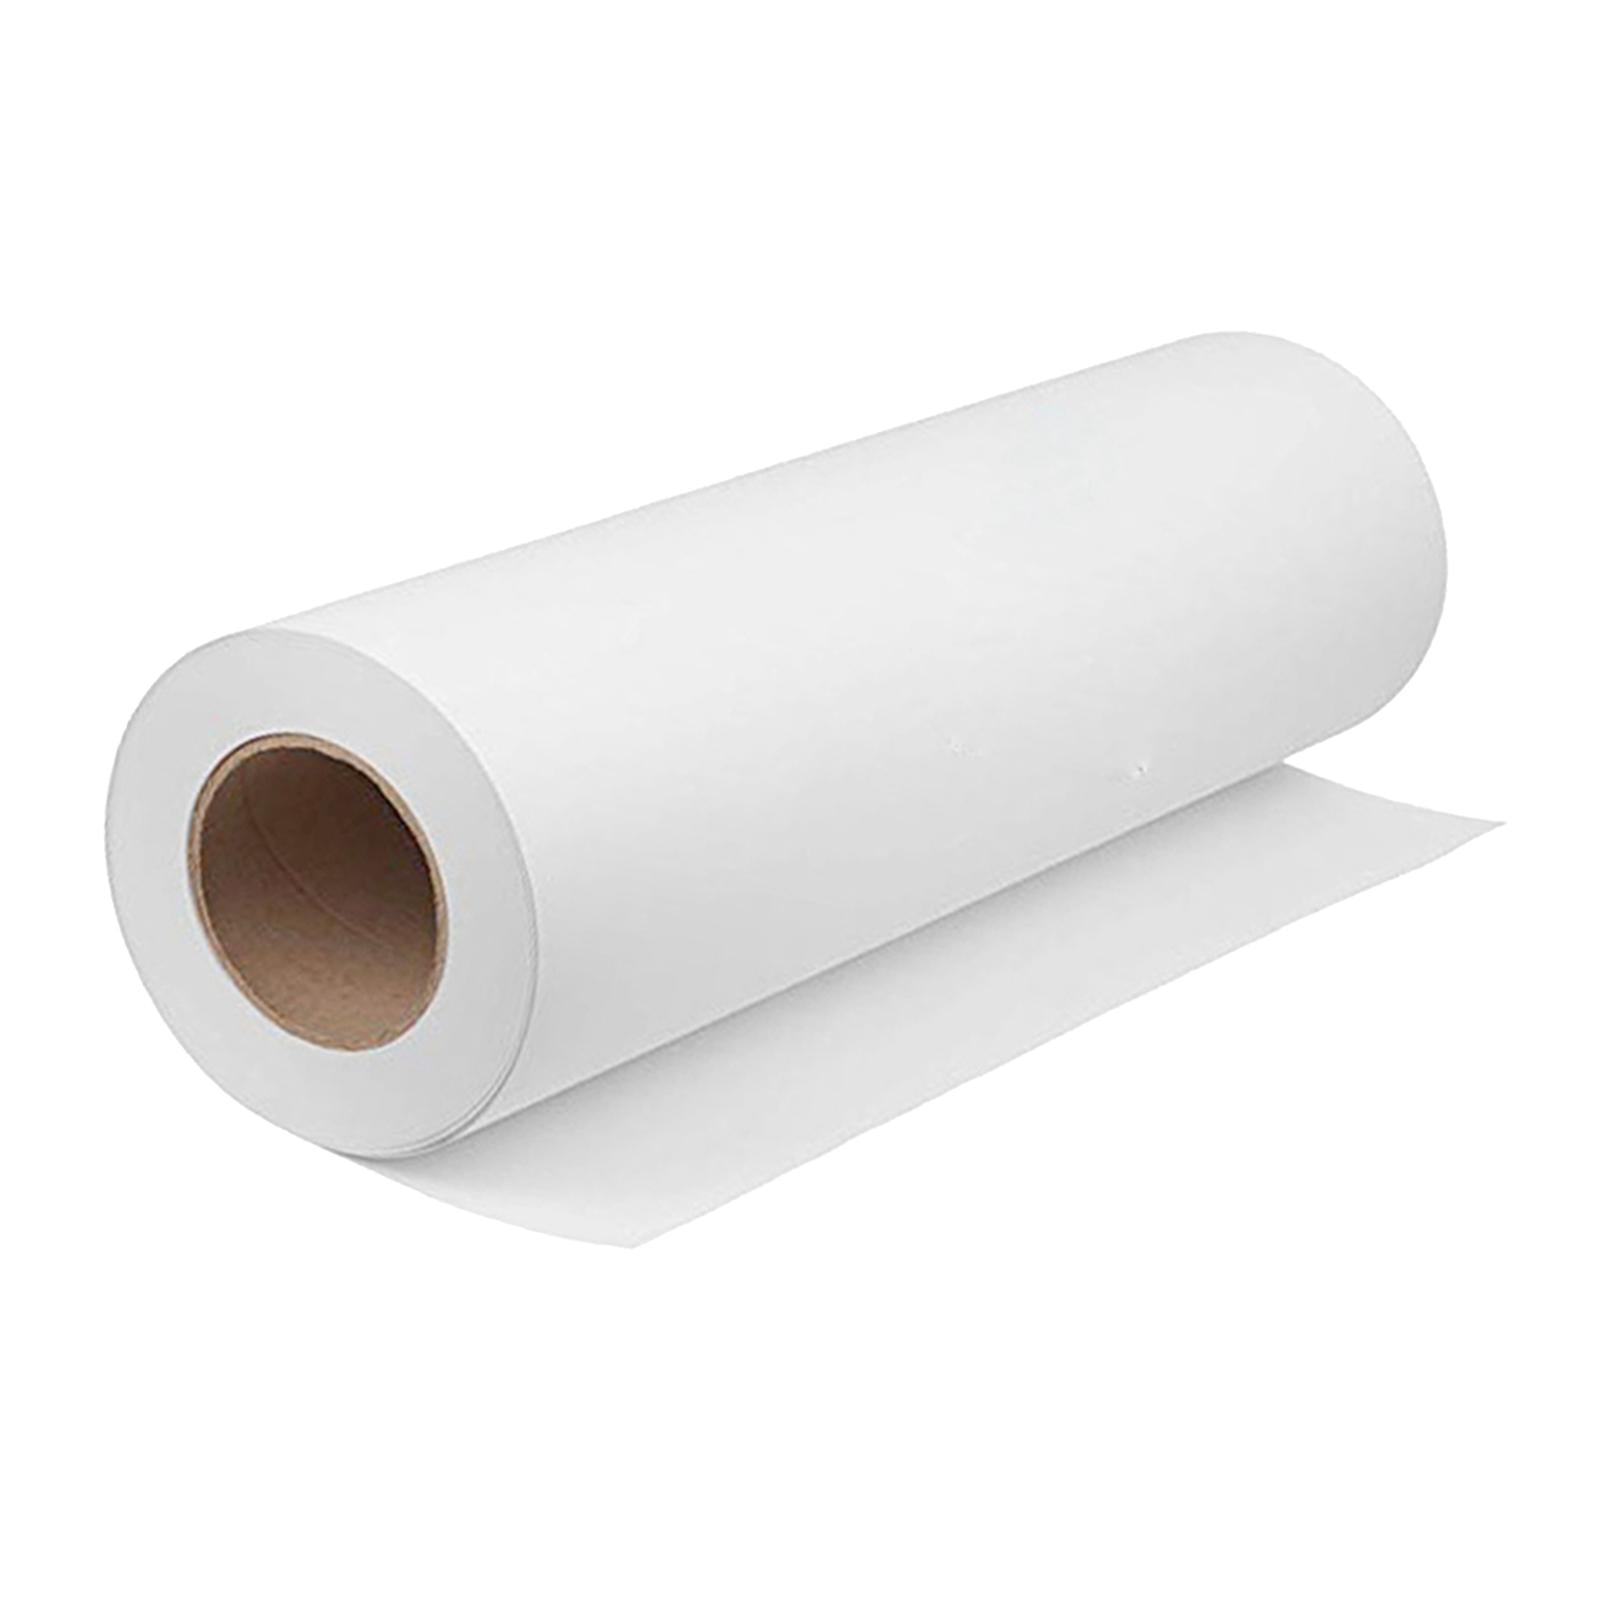 Ideal for Kids Projects by Paper Pros Durable Art Easel Paper Roll for Crafts Drawing & Painting 30 inches x 200 feet